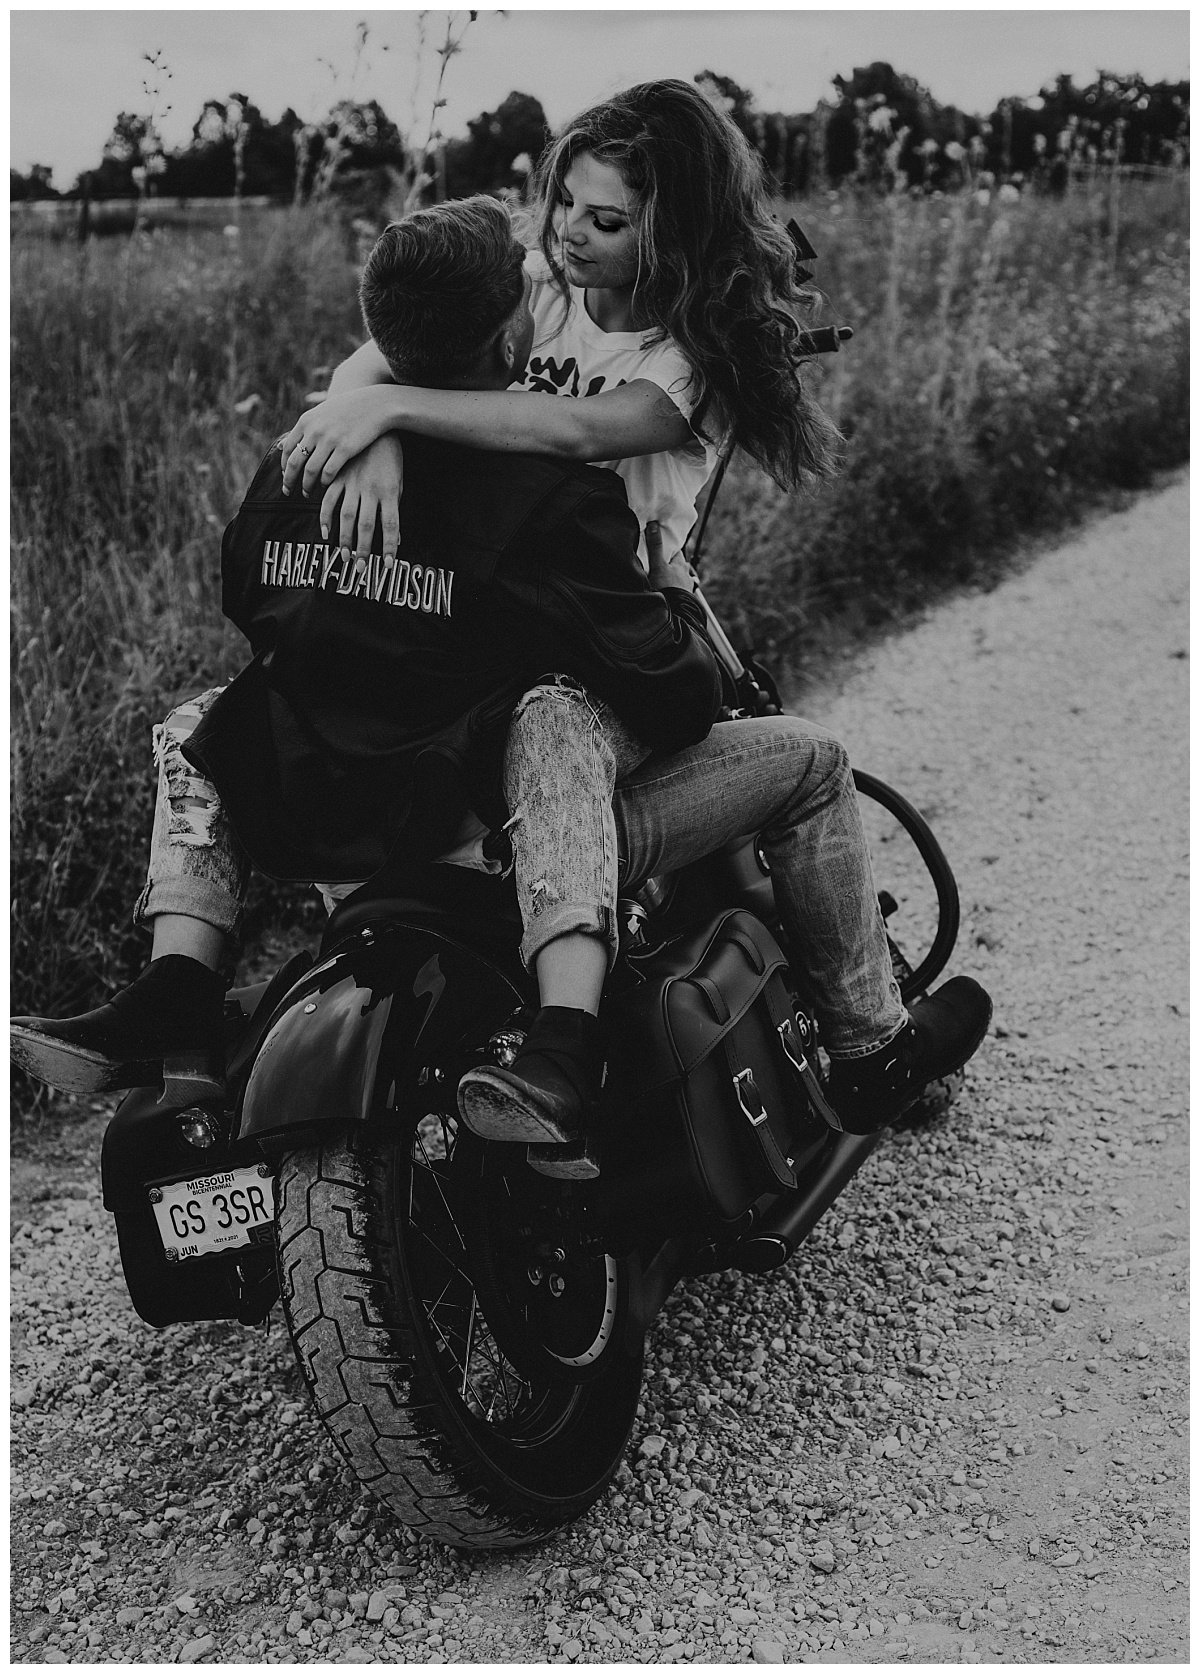 motorcycle+session+_+adventure+session+_+engagement+session+_+motorcycle+photos+_+lana+del+rey+_+ride+or+die+_+adventurous+couple+_+kansas+city+photographer+_+kansas+city+photography (3).jpeg